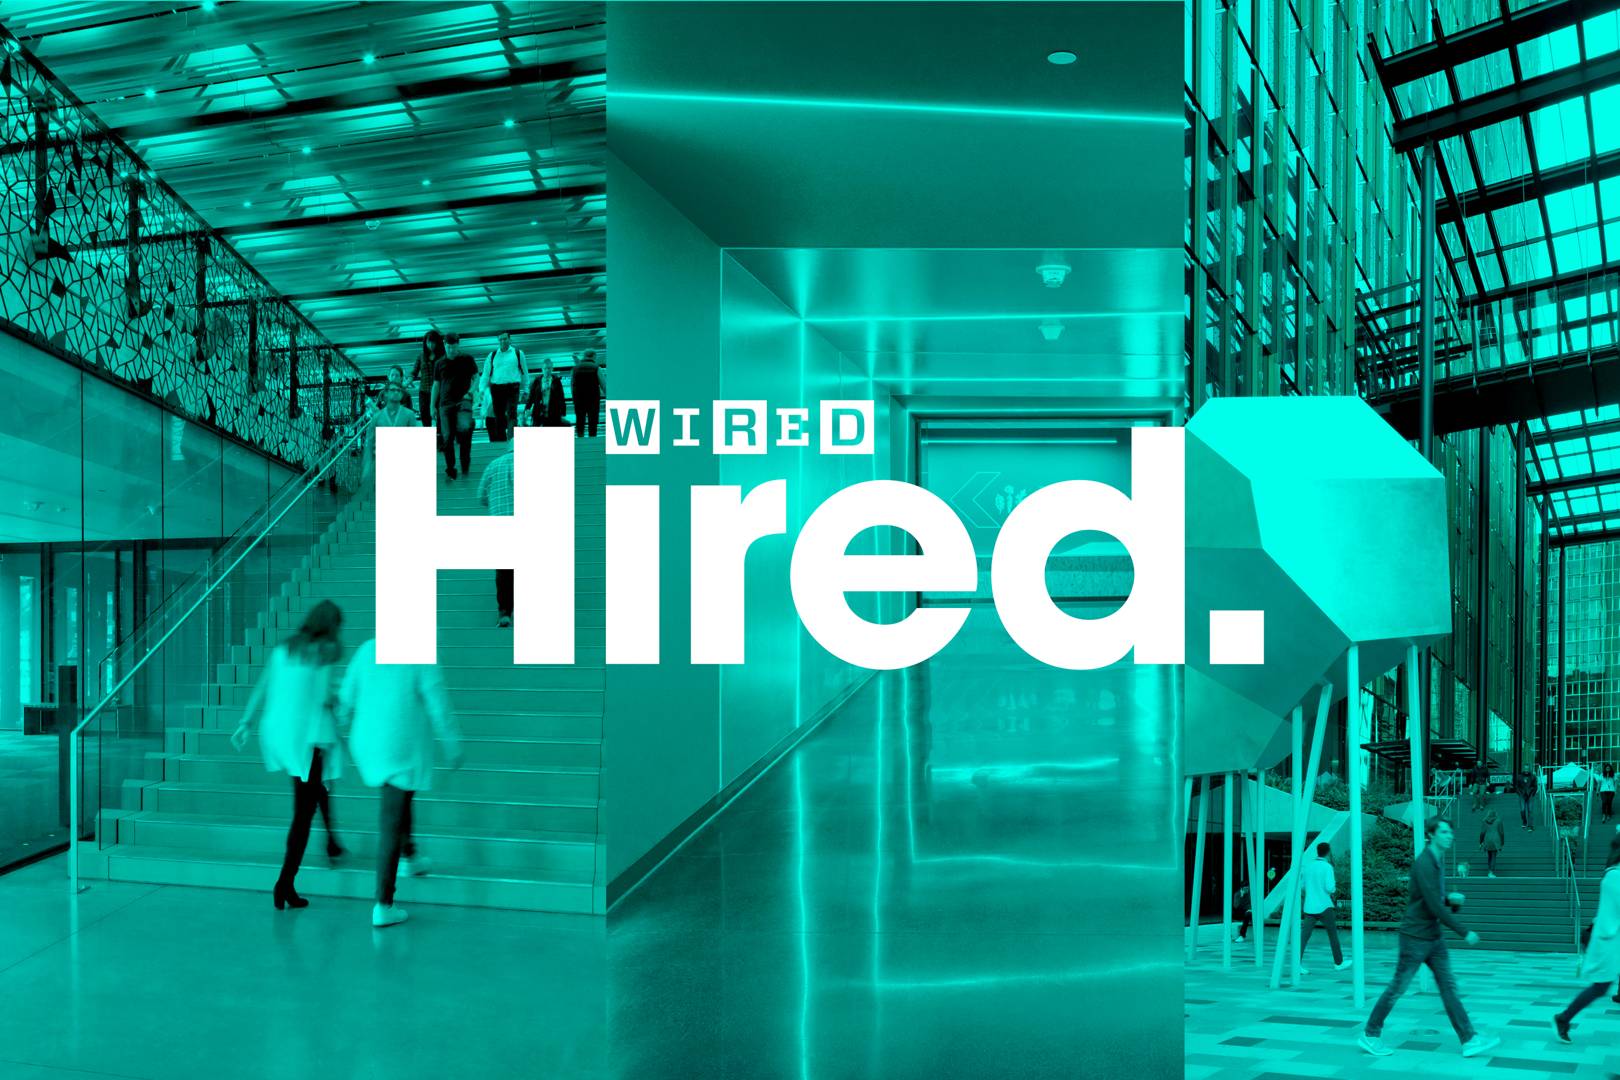 Find your next dream job on WIRED Hired